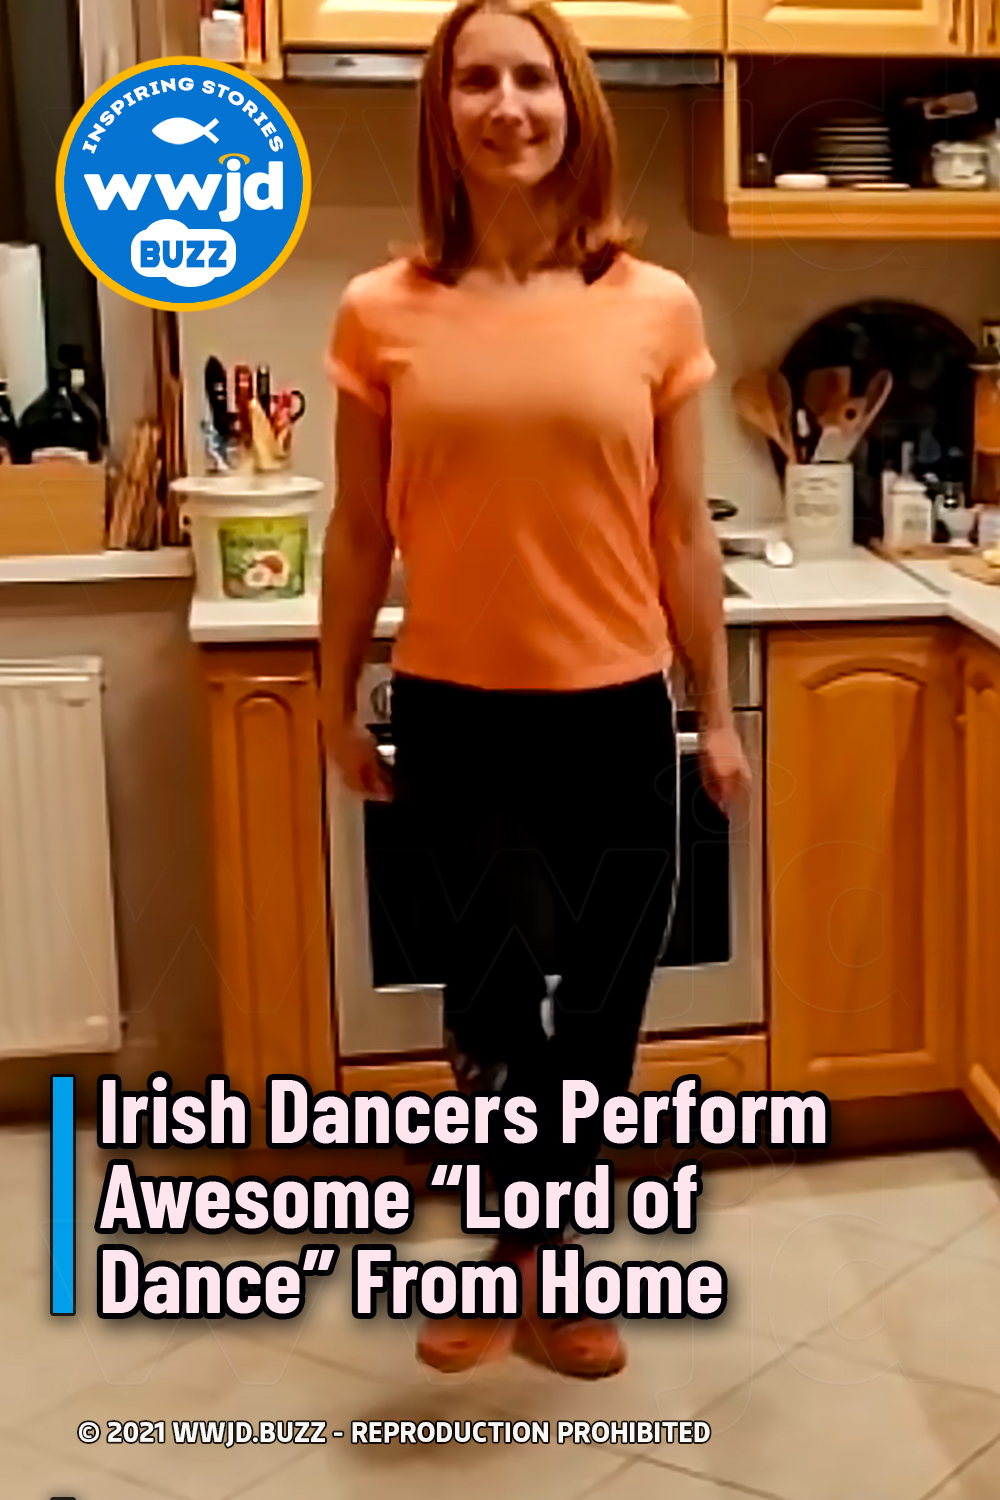 Irish Dancers Perform Awesome “Lord of Dance” From Home